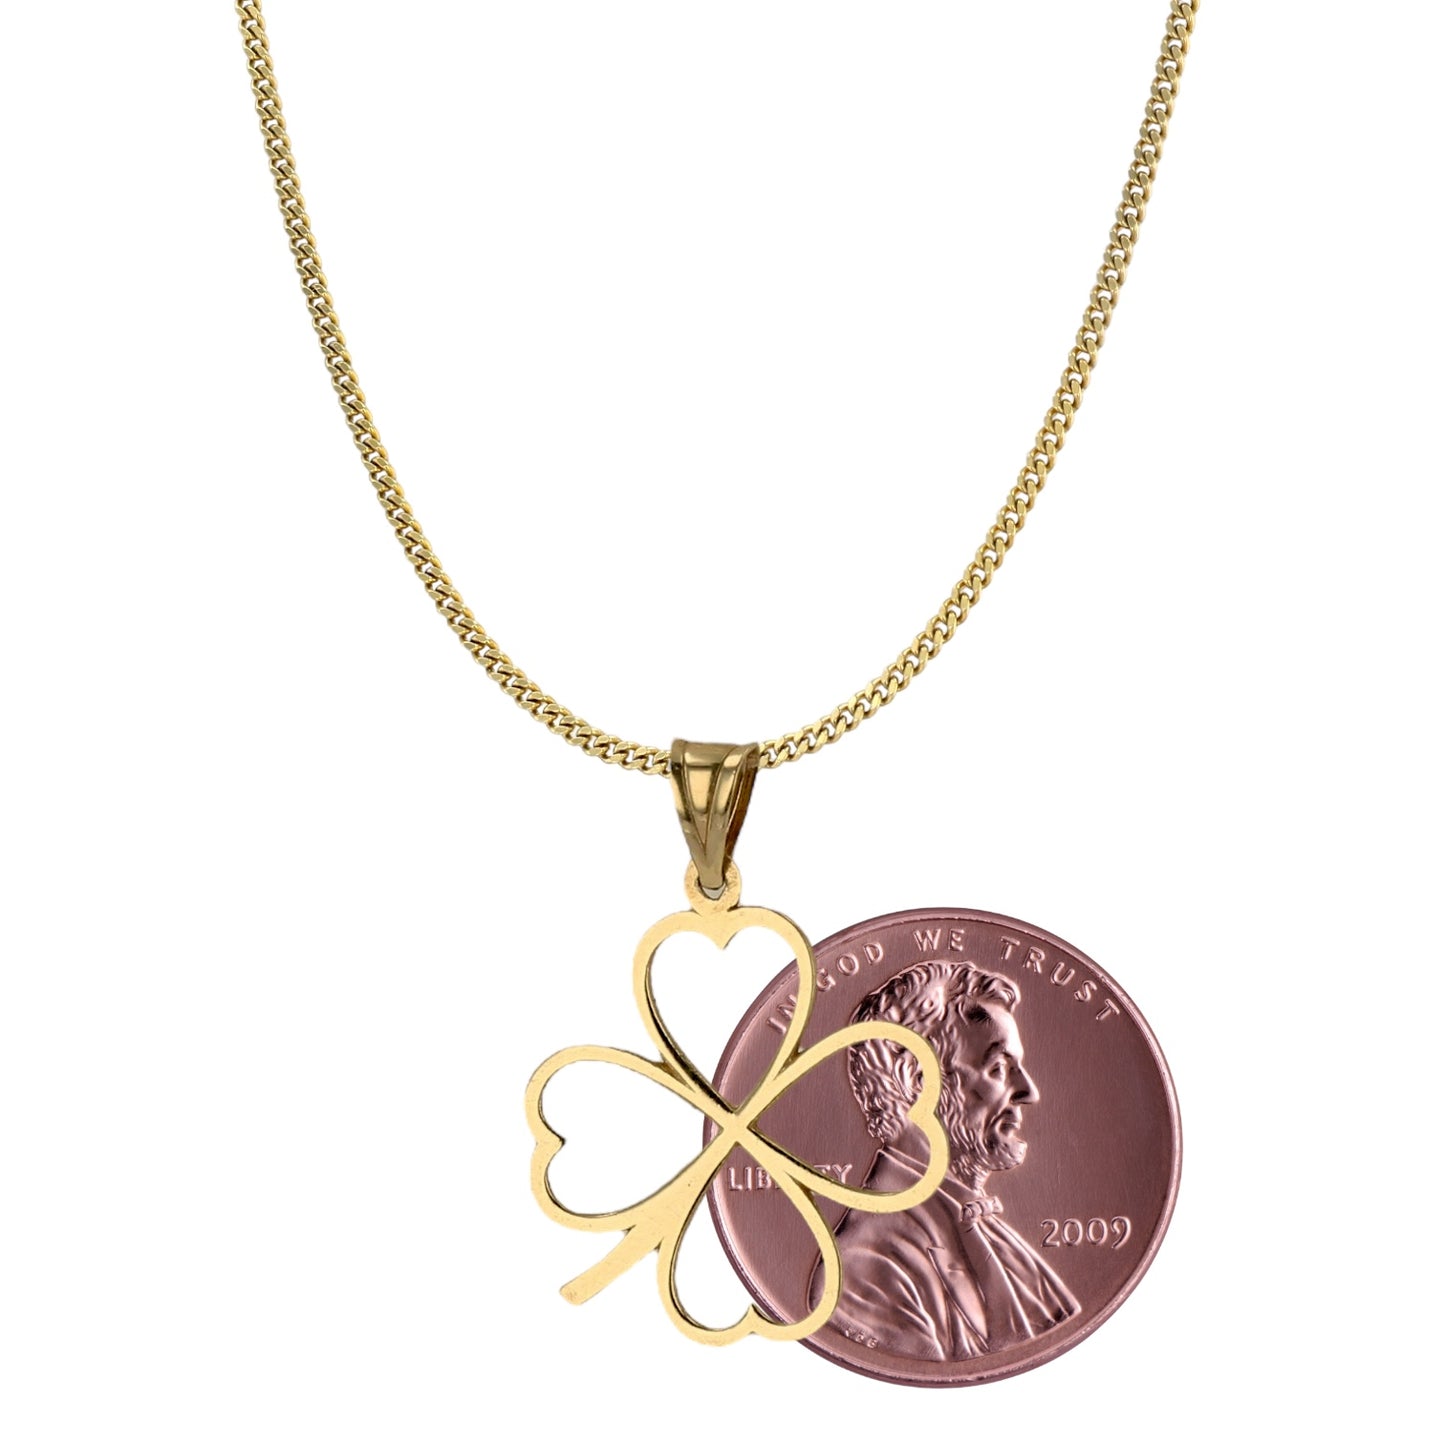 10k yellow gold clover necklace-50027